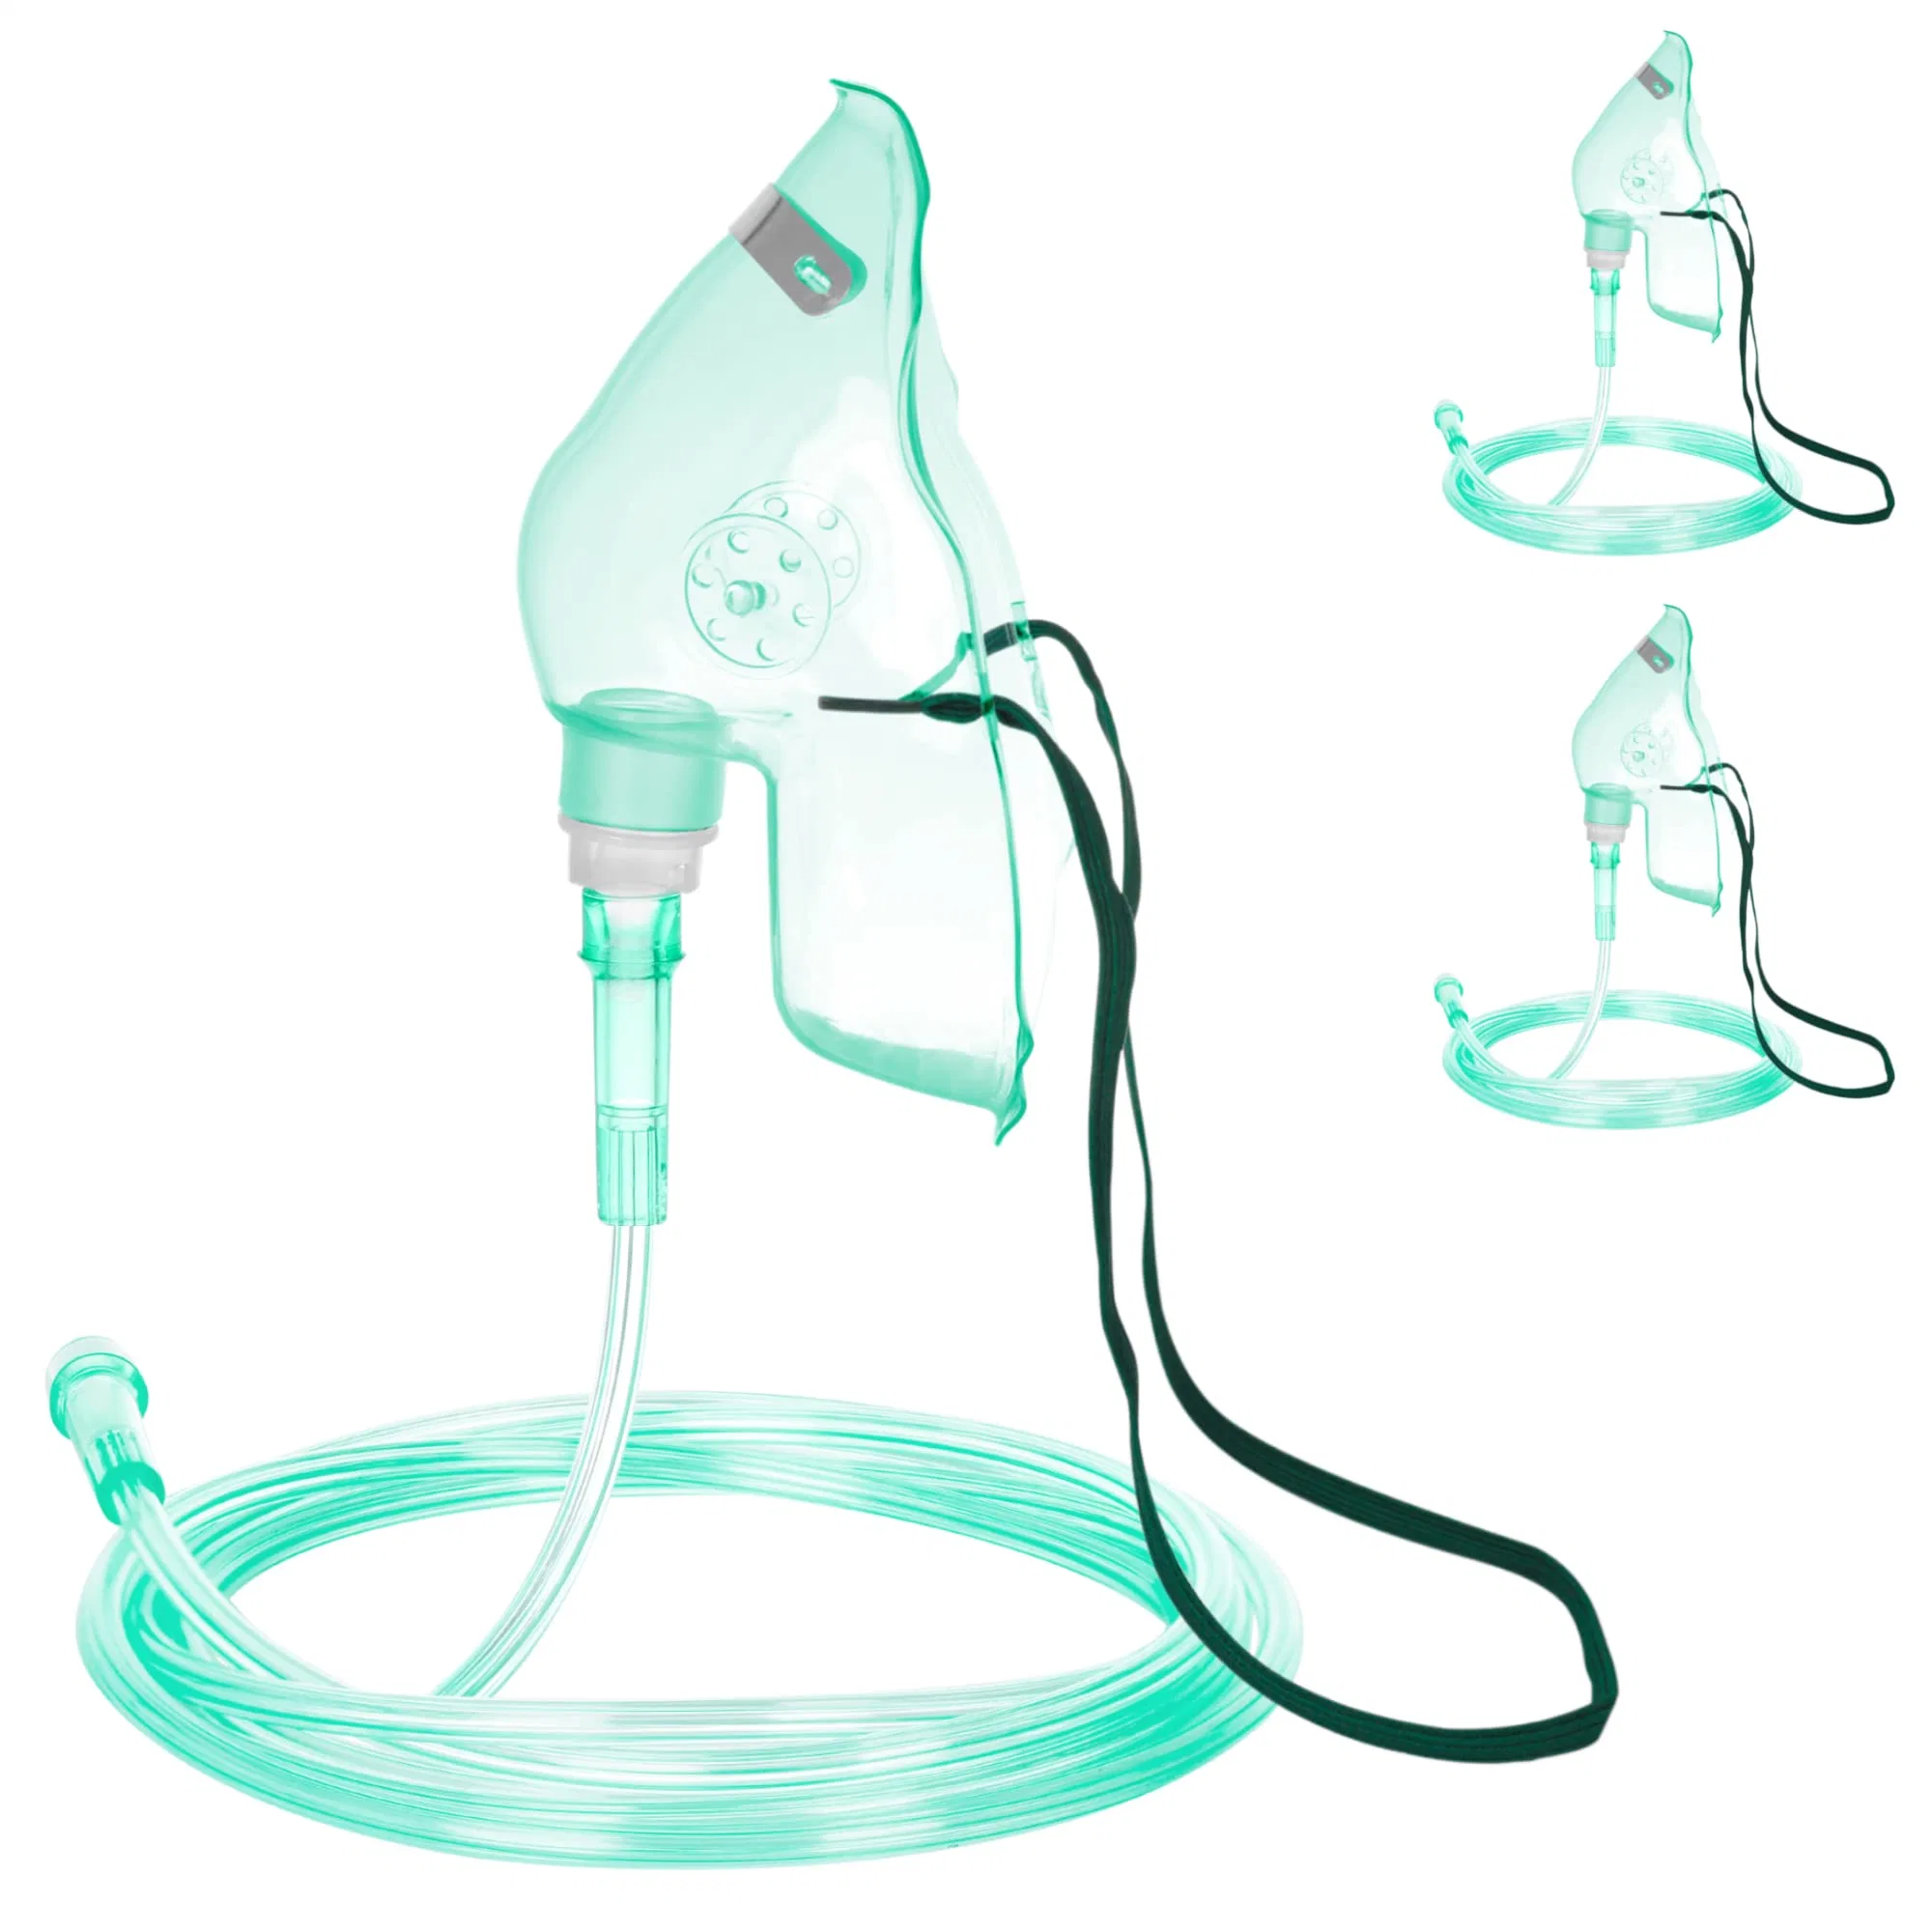 Siny Hot Sale Plastic Portable Products Sterile Medical Supply Mask Oxygen